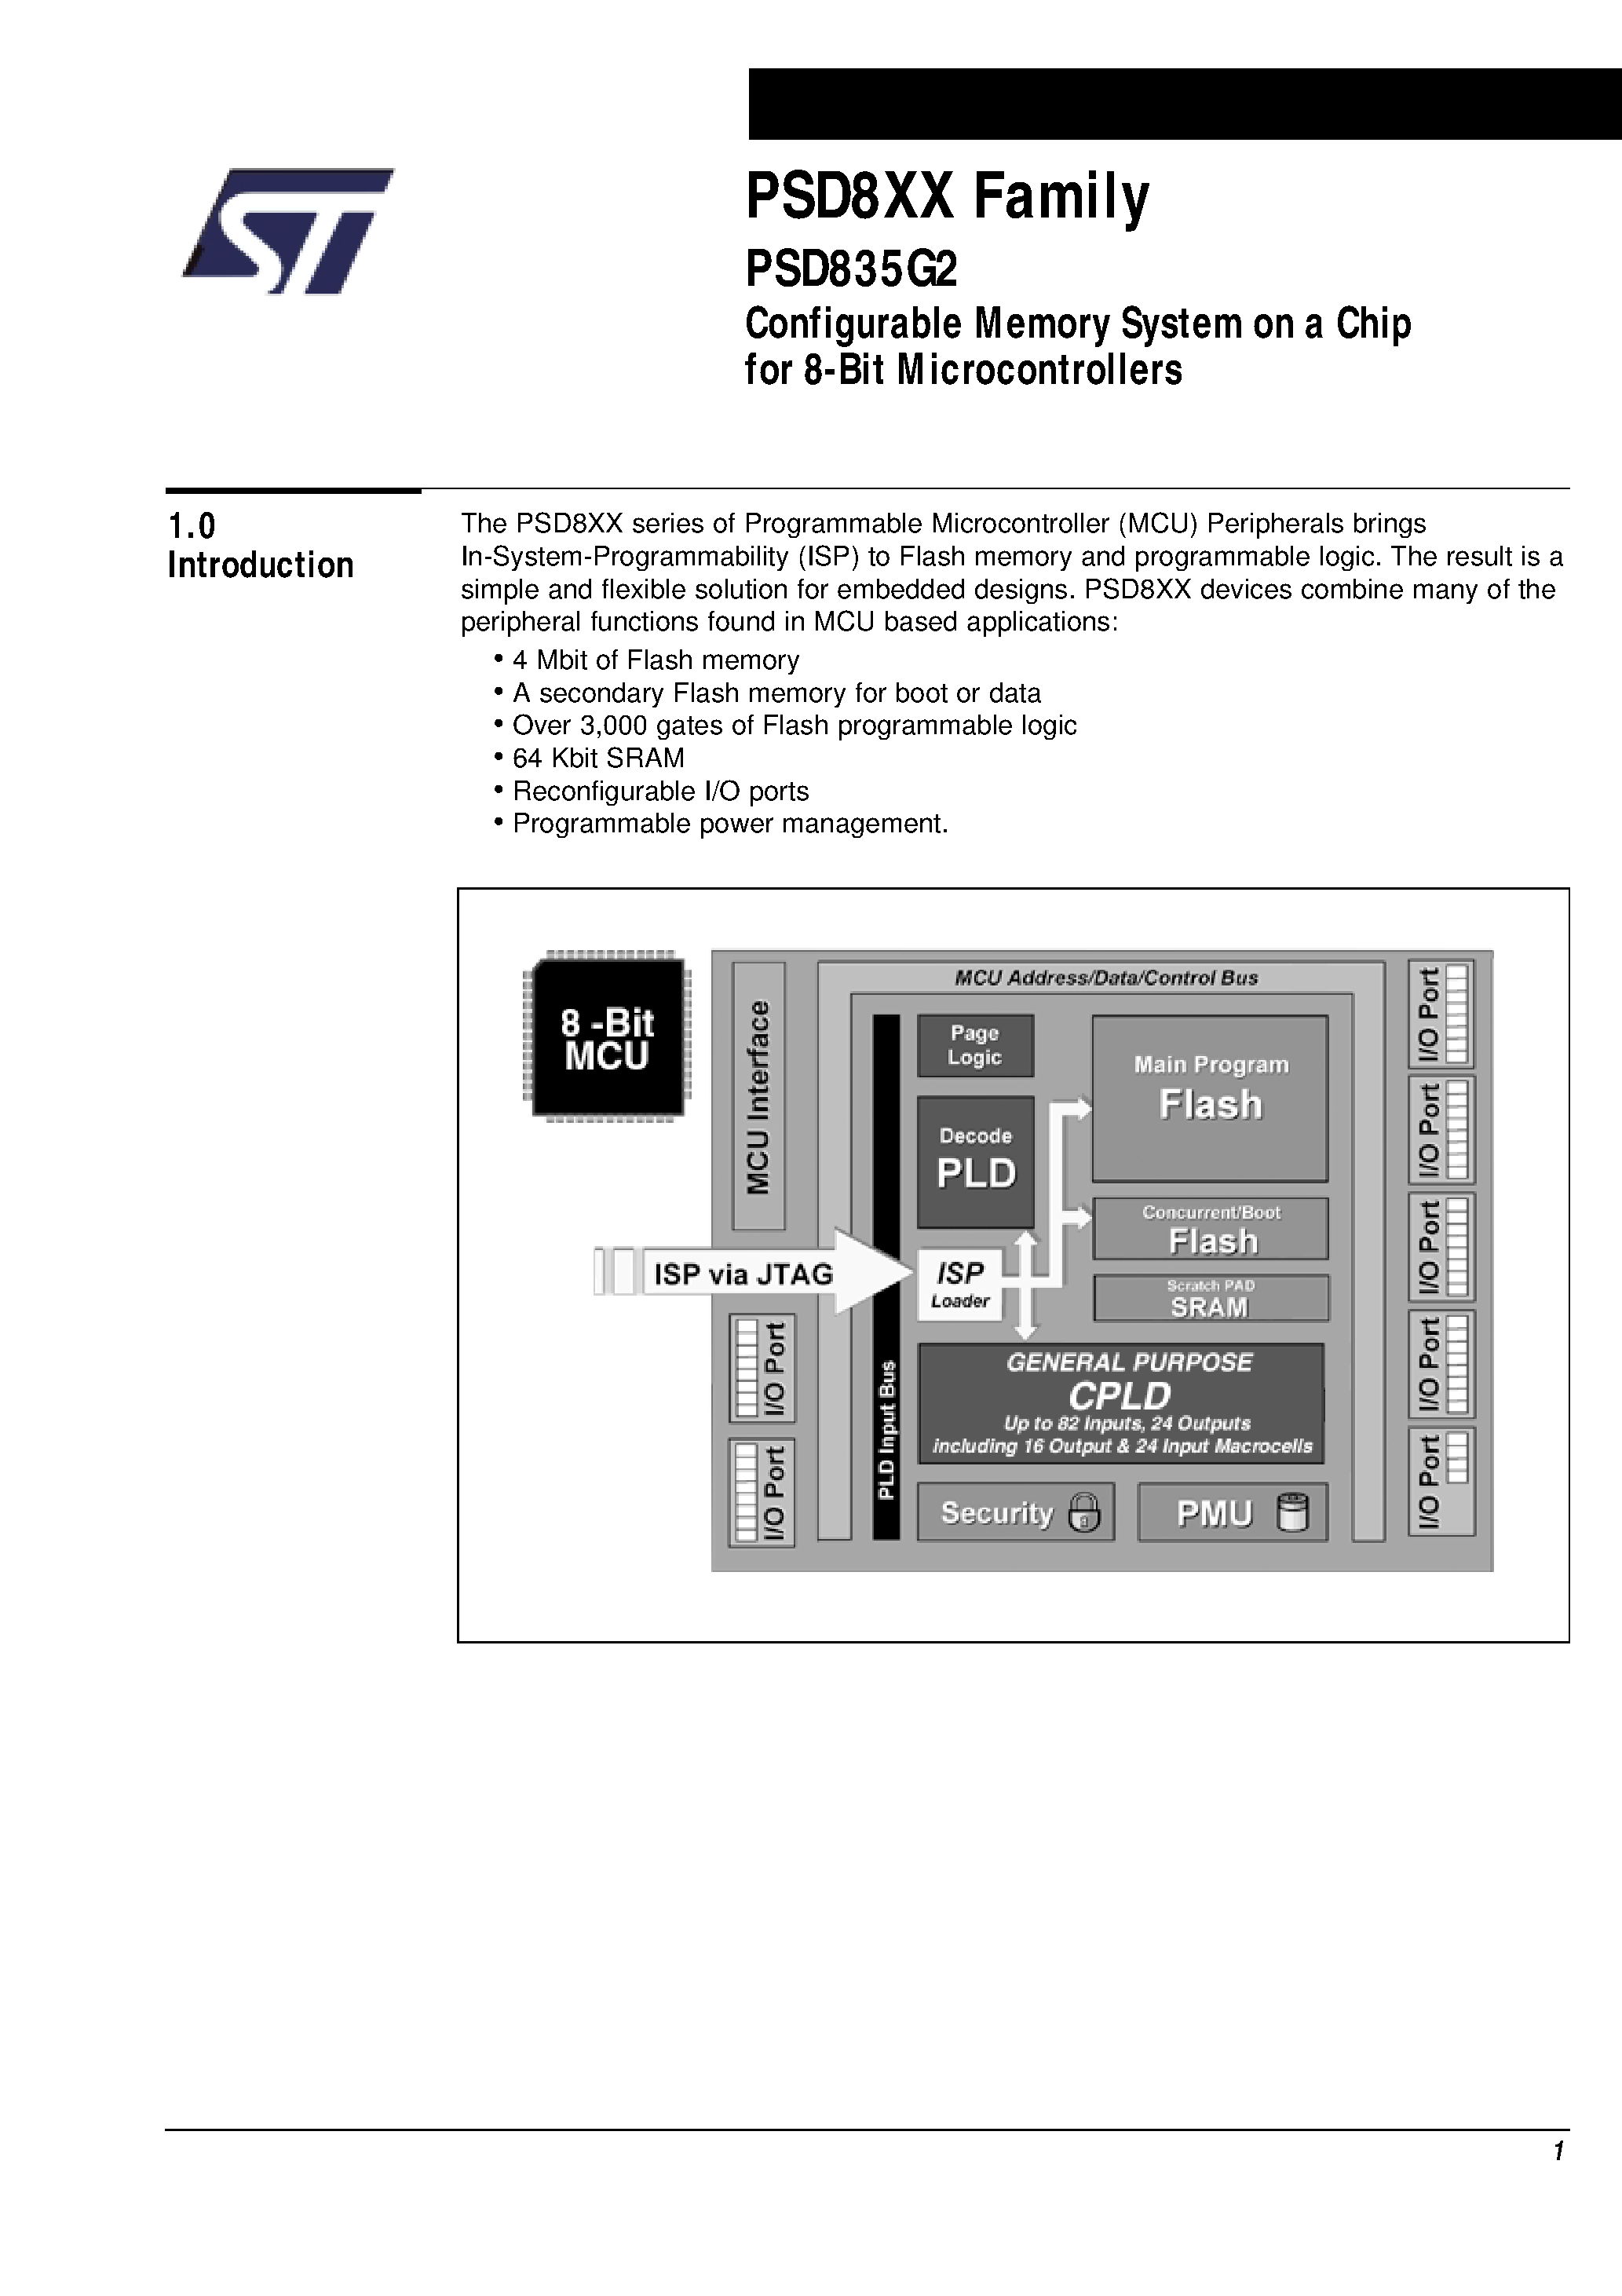 Datasheet PSD835F1-A-70UI - Configurable Memory System on a Chip for 8-Bit Microcontrollers page 2